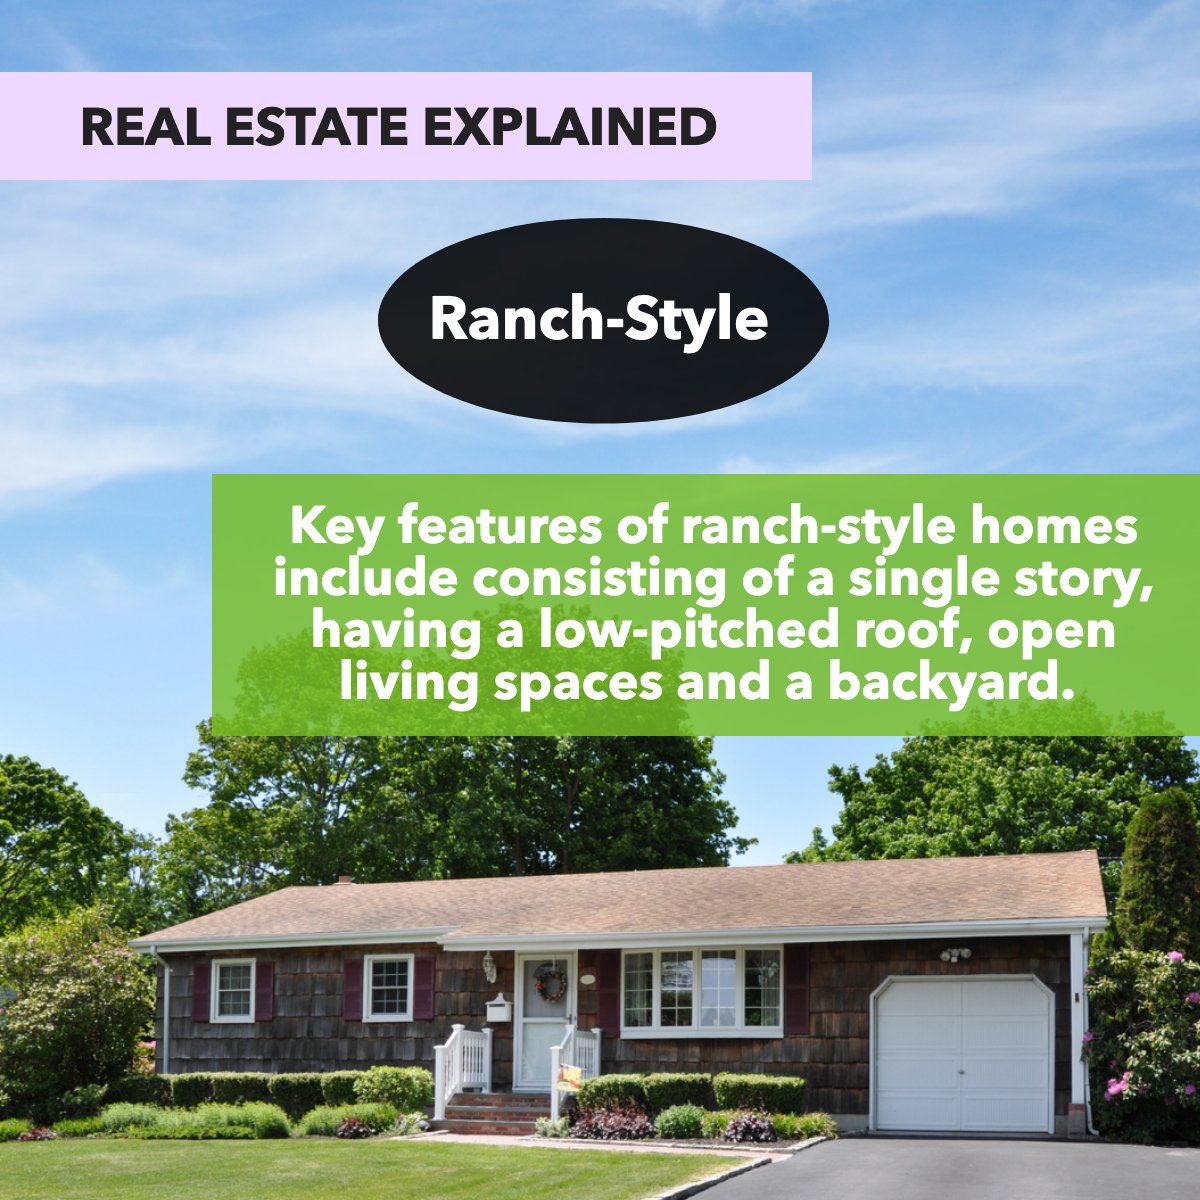 Ranch-style houses are now the most commonly searched-for style of home in the United States. 🏘️

#ranchostyle #ranchhousestyle #ranchstylehomes
 #realestate #buy #purchase #firsttimehomebuyer #fha #chase #zillow #rockland #bergen #westchester #listingagent